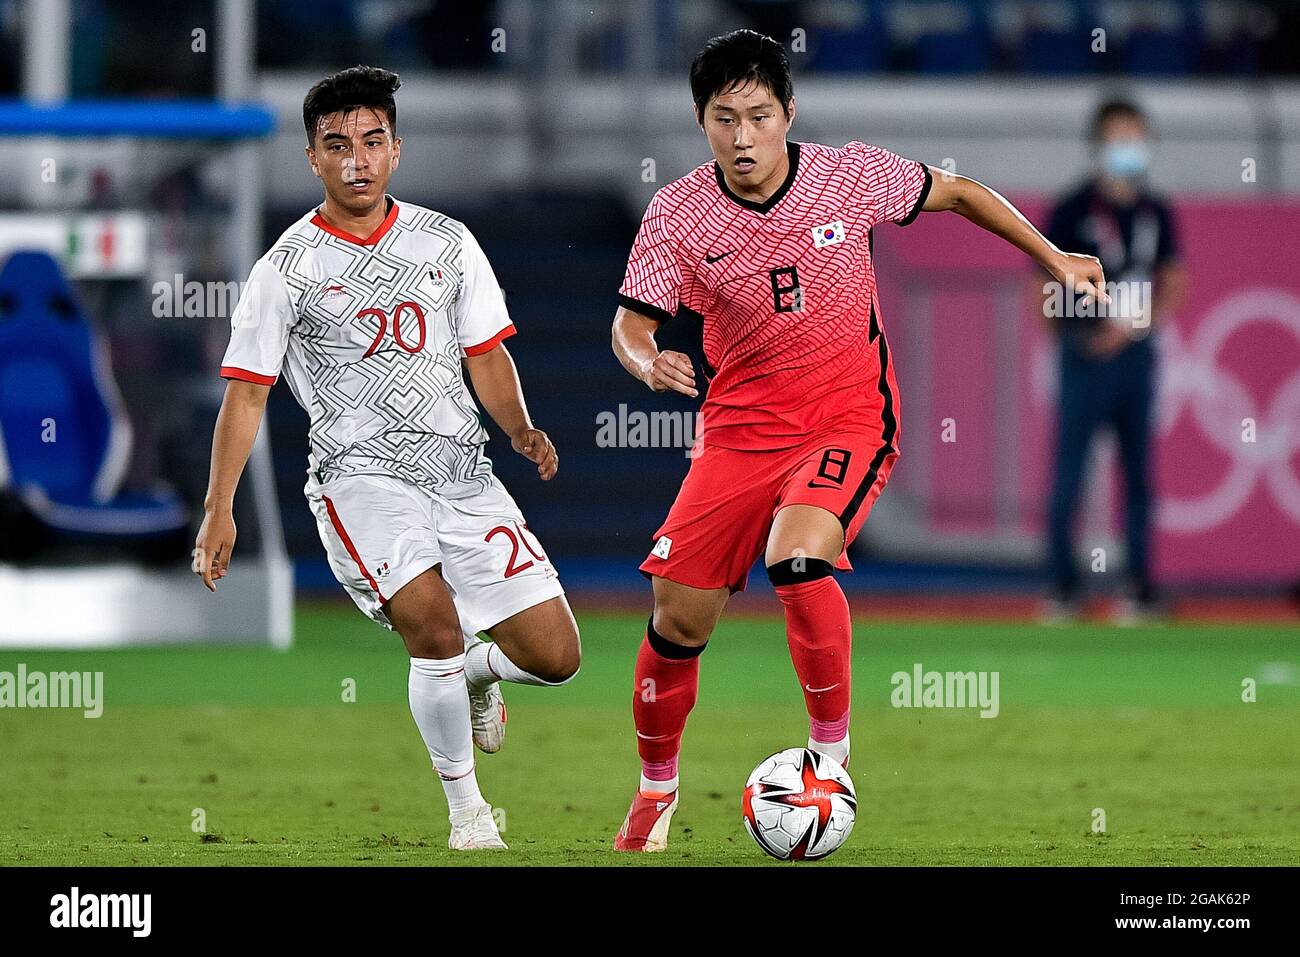 YOKOHAMA, JAPAN - JULY 31: Fernando Beltran of Mexico and Kang-in Lee of South Korea during the Tokyo 2020 Olympic Mens Football Tournament Quarter Final match between South Korea and Mexico at International Stadium Yokohama on July 31, 2021 in Yokohama, Japan (Photo by Pablo Morano/Orange Pictures) Stock Photo